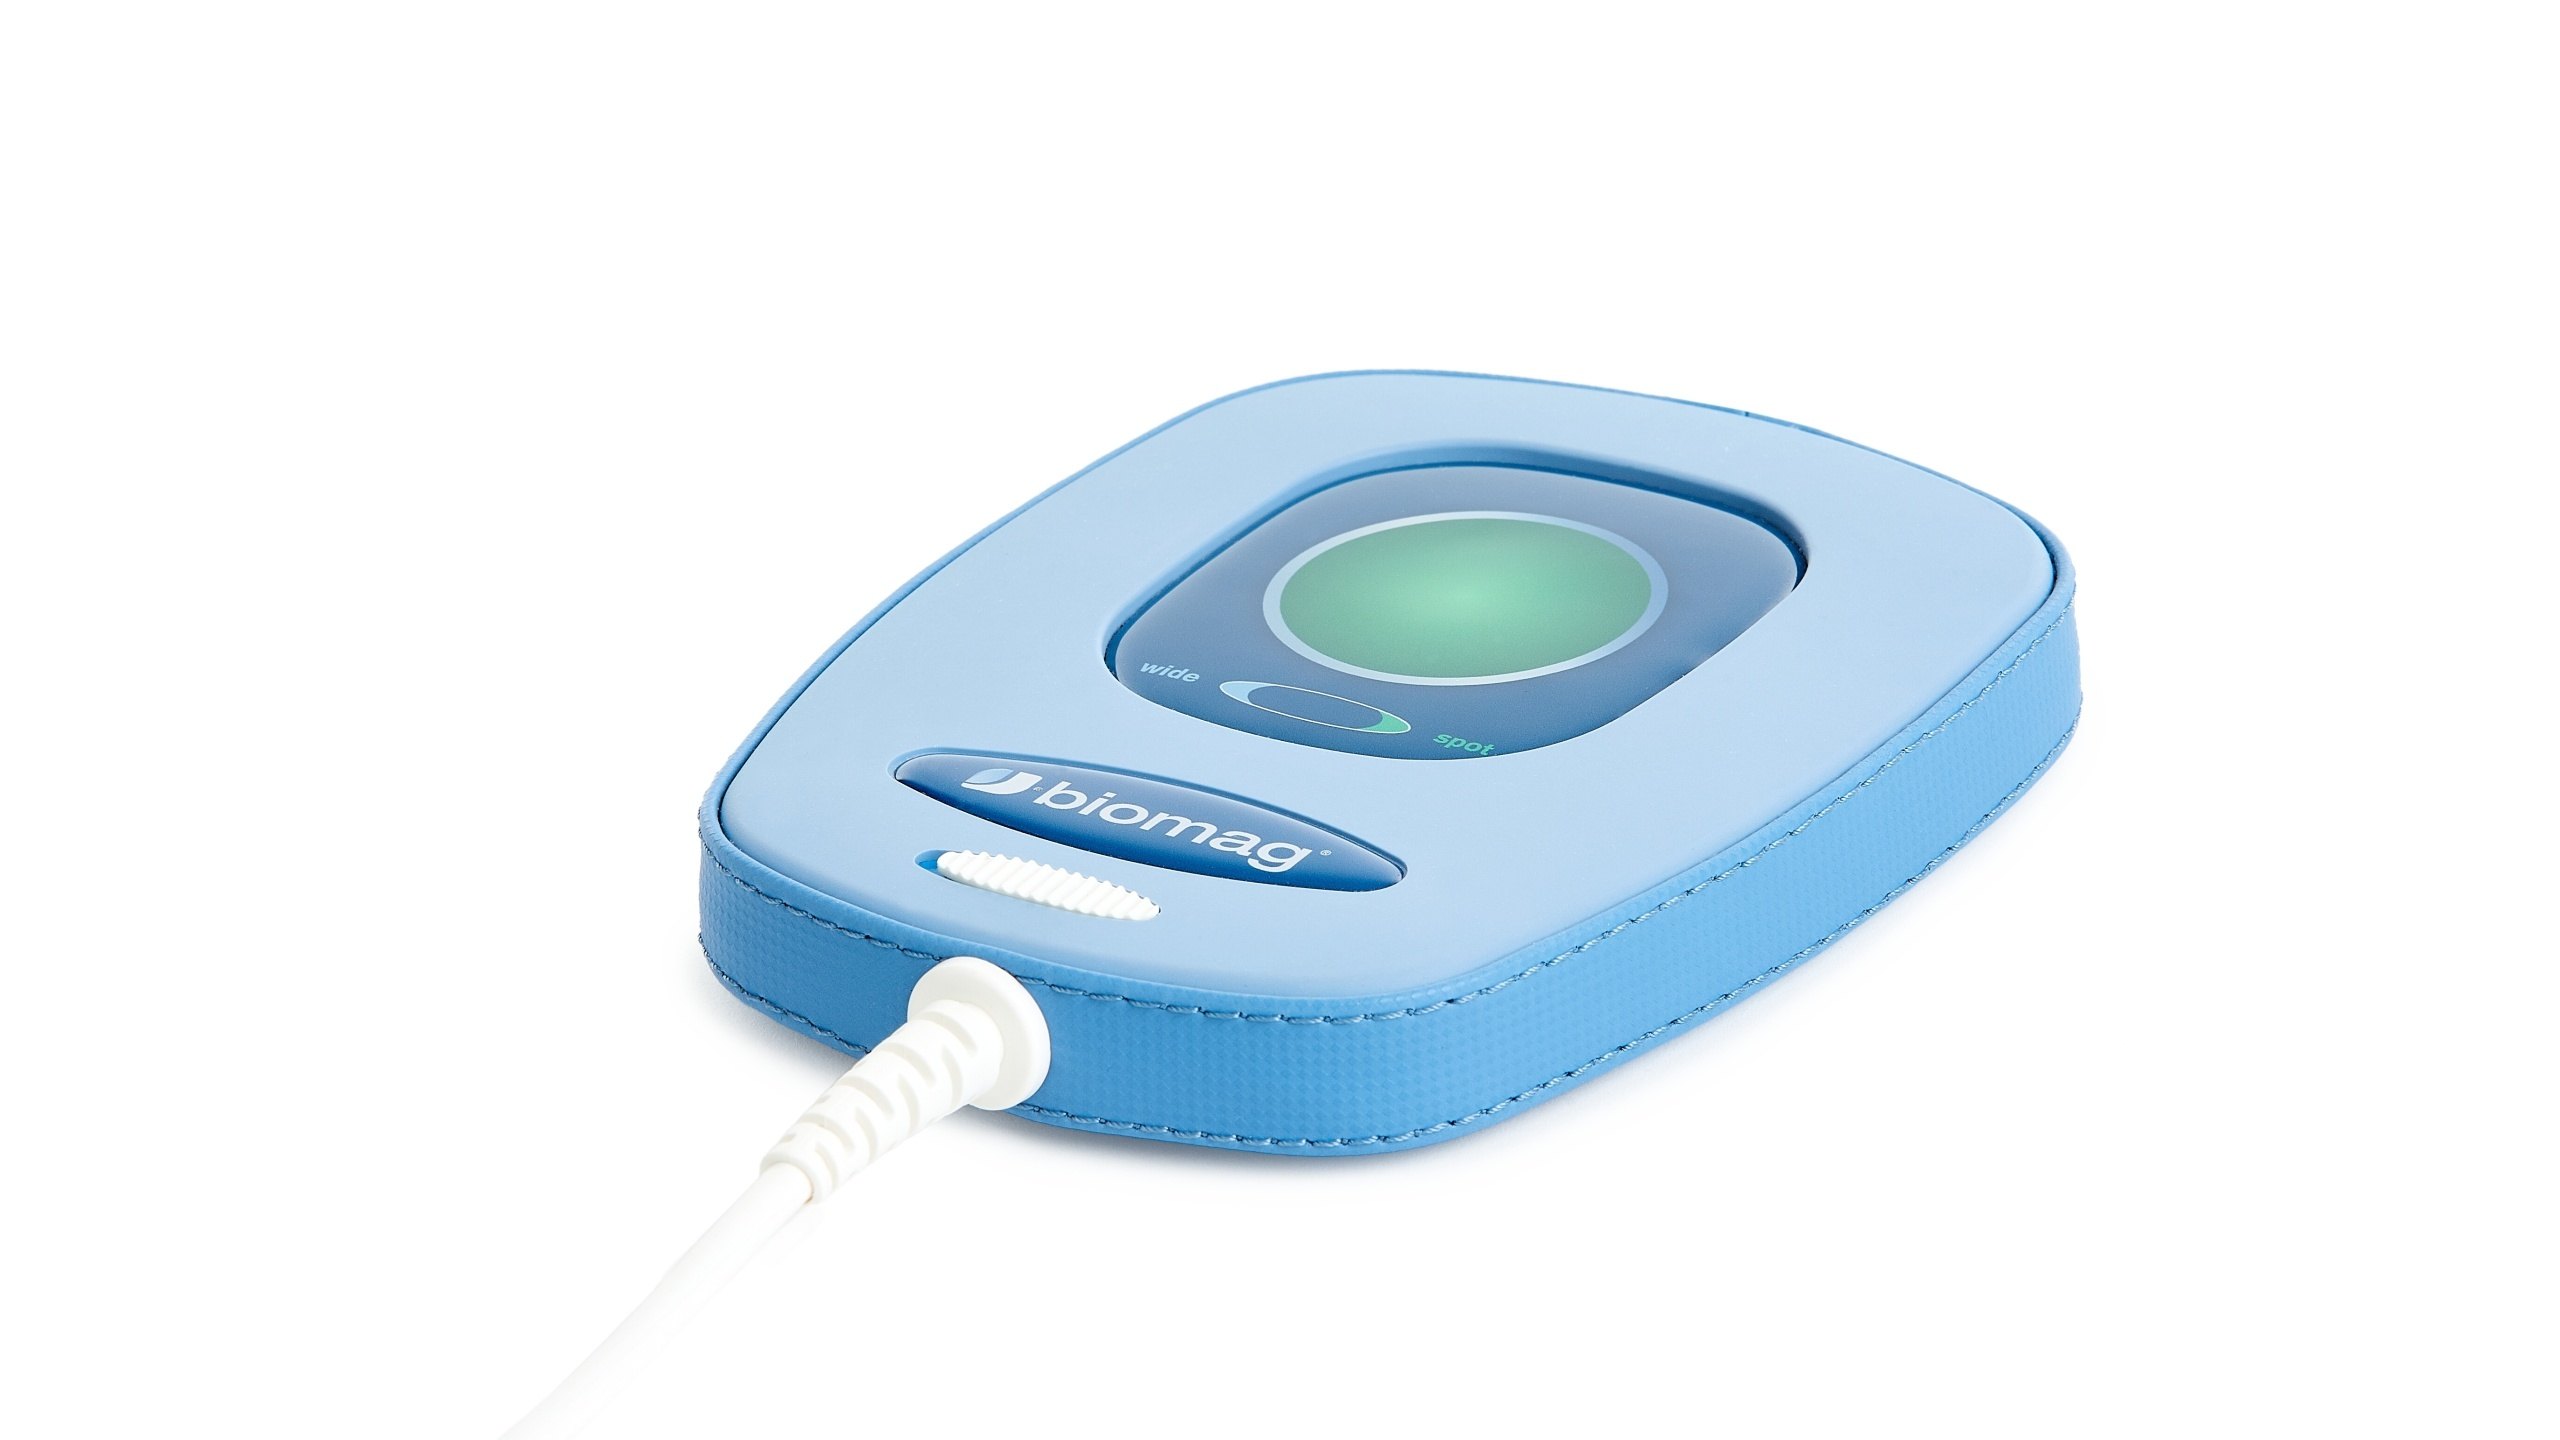 Magnetic therapy applicator A62P2 with a switch option. It can apply a spot magnetic field or switch to application of a wide magnetic field.